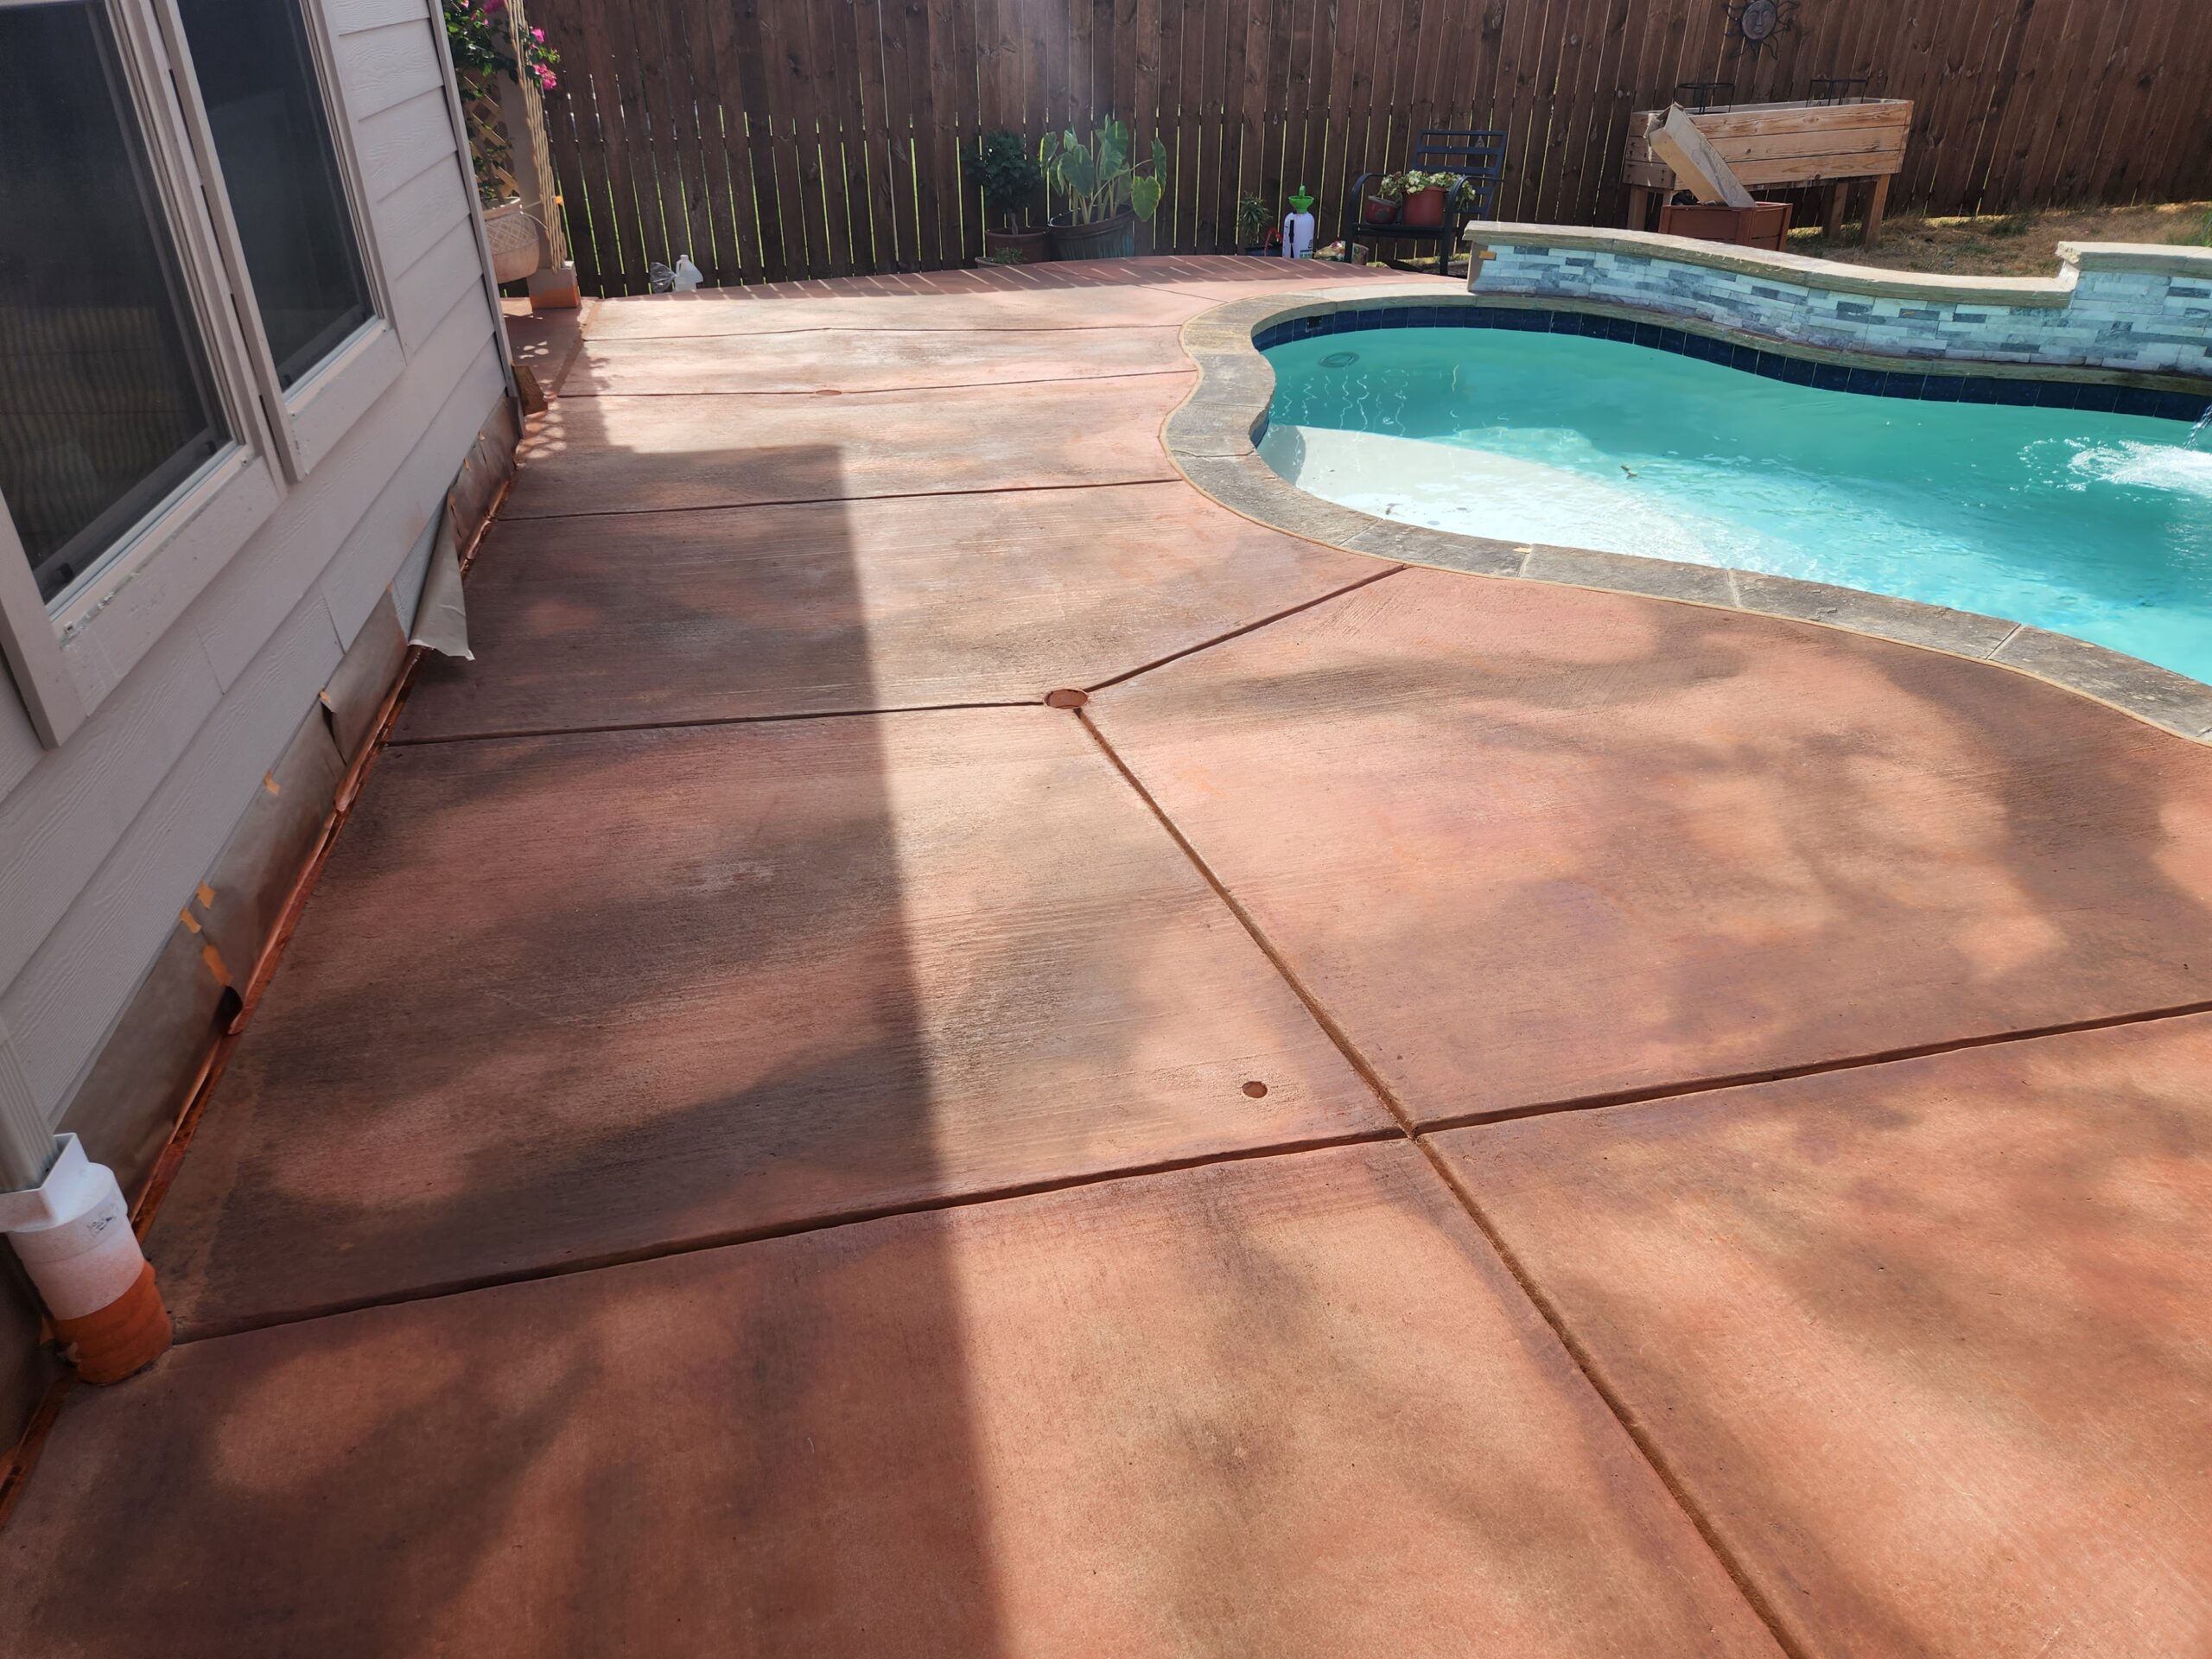 Stained concrete pool deck featuring a warm Terracotta base color and highlighted with driftwood hues